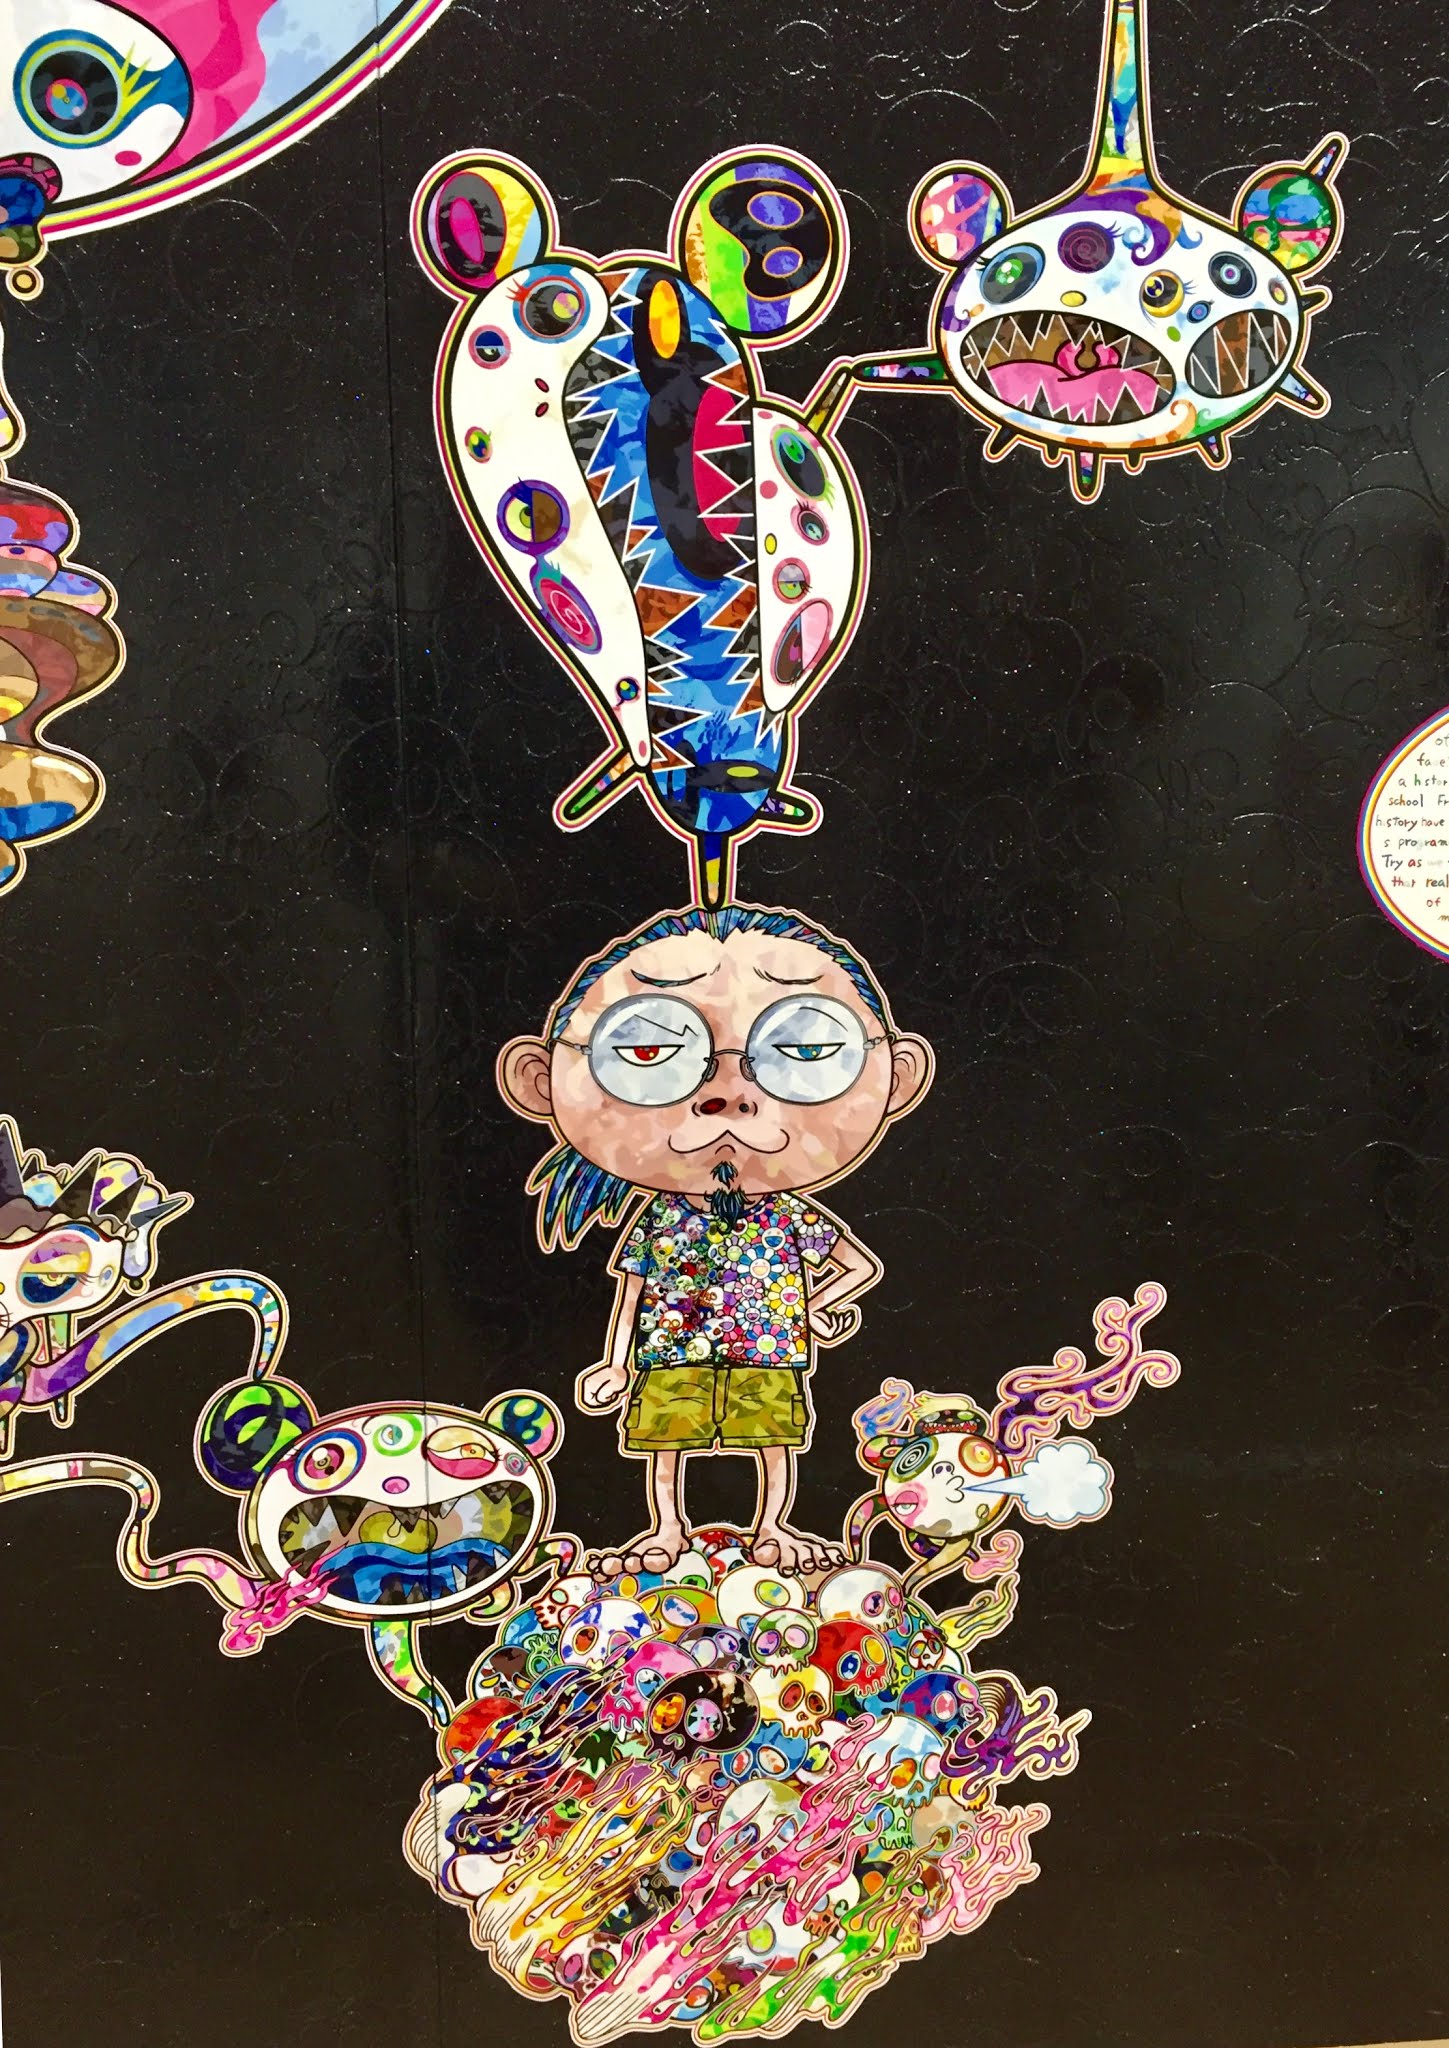 Takashi Murakami: The Octopus Eats Its Own Leg exhibit at the Museum of Modern Art in Fort Worth, Texas